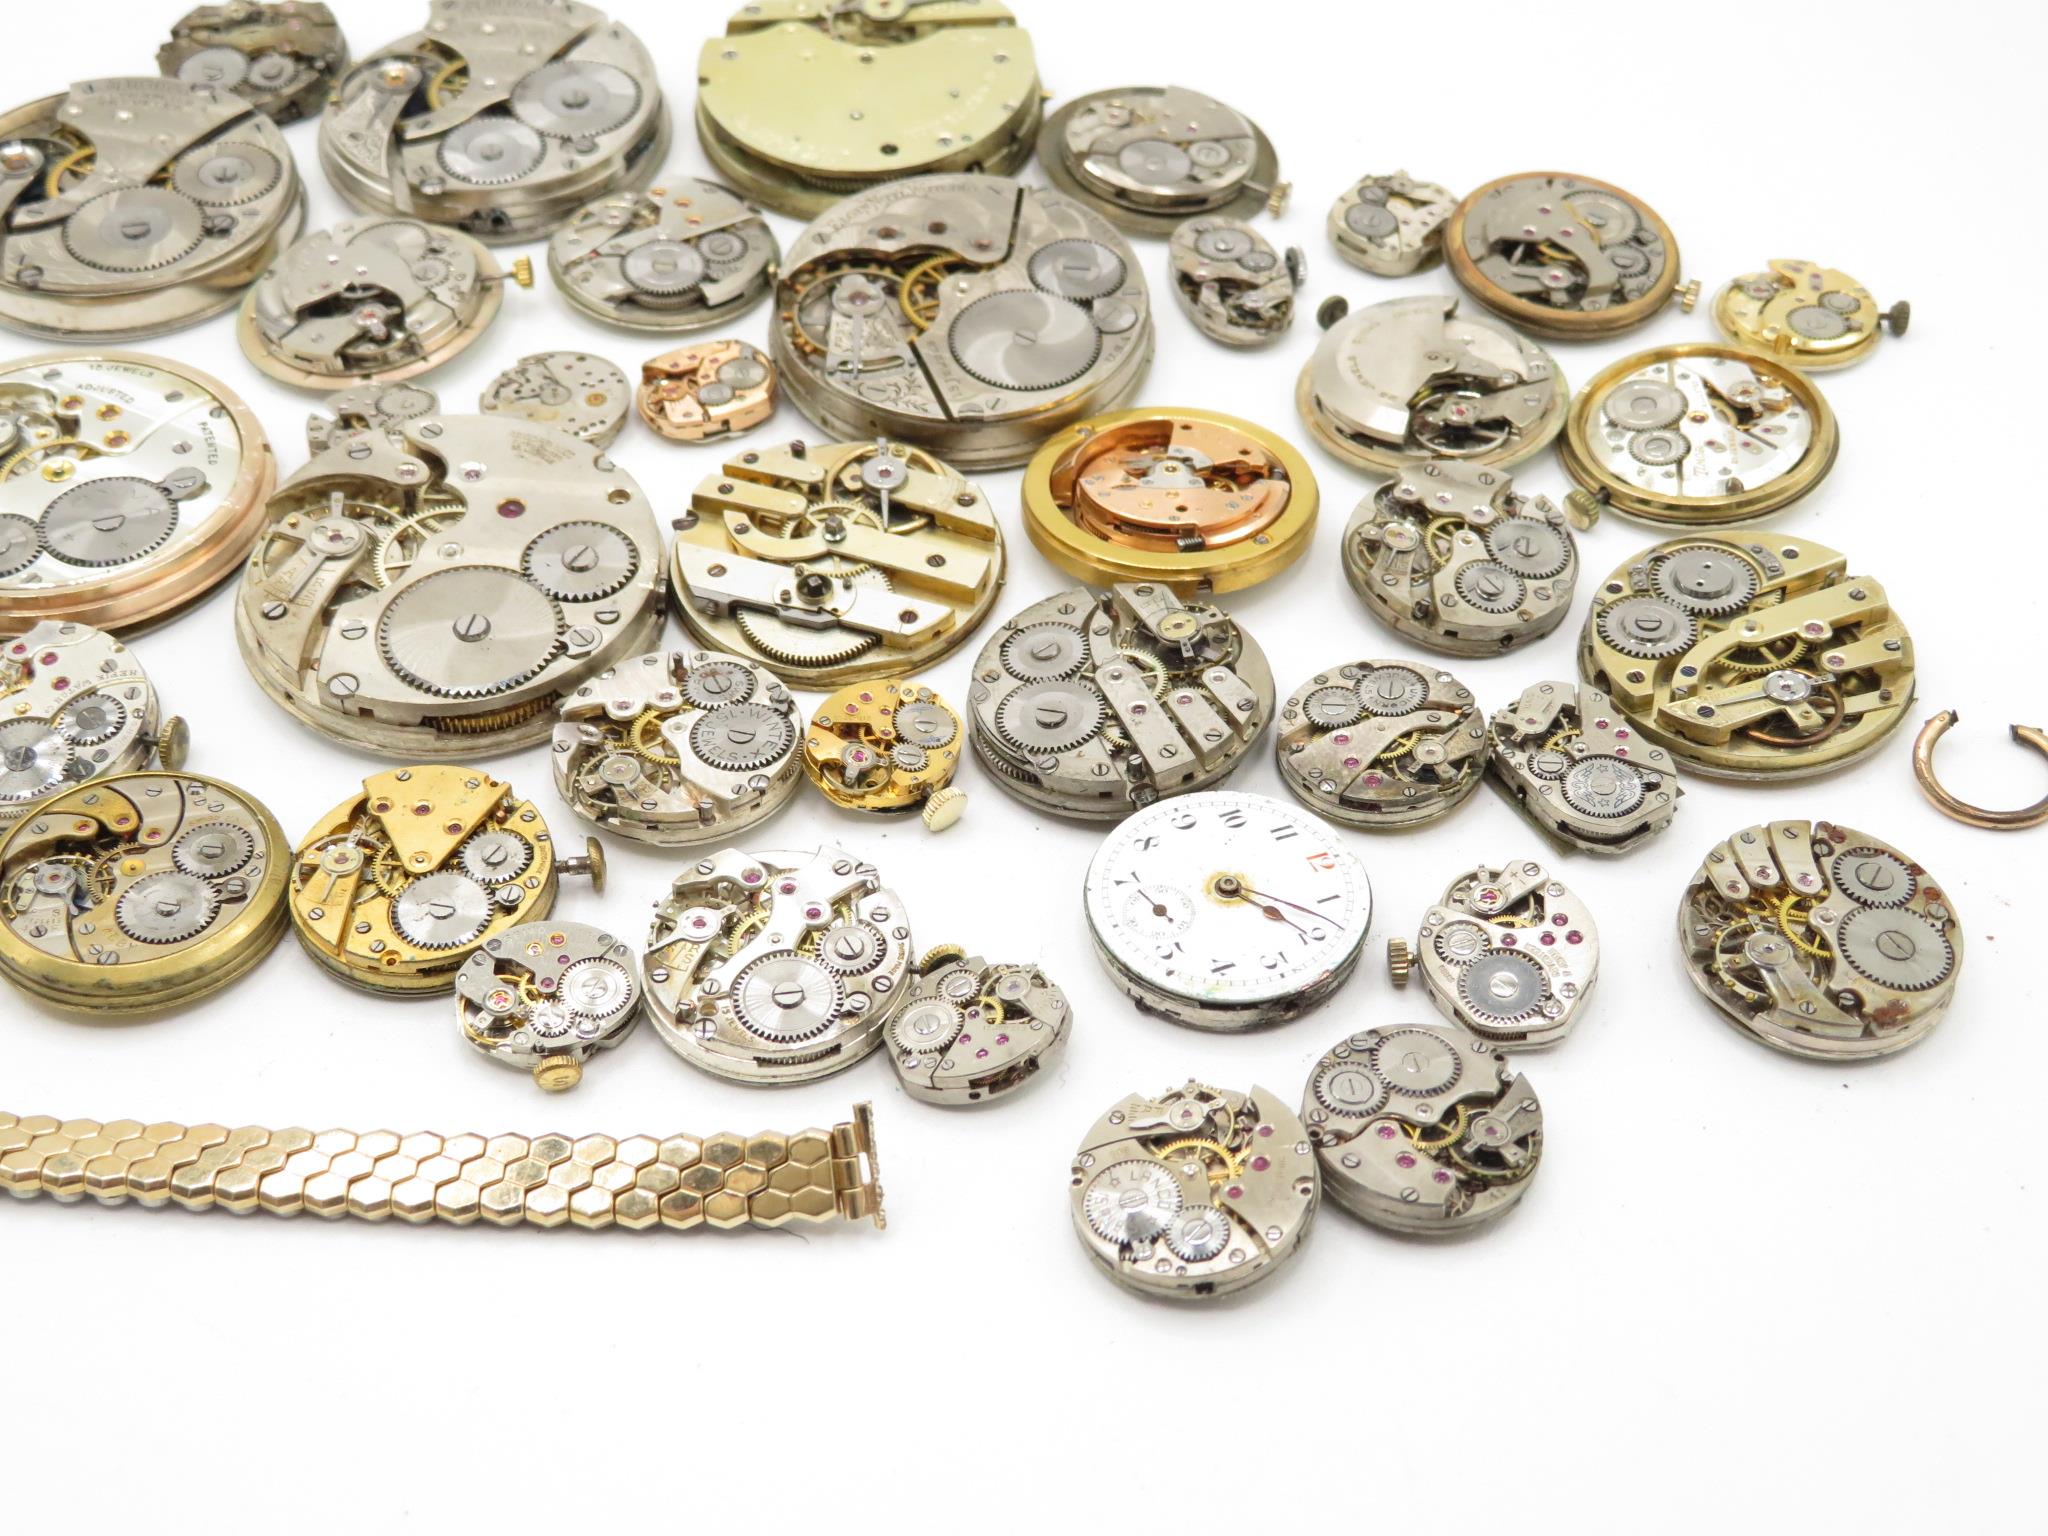 Bag of pocket watch and wristwatch movements 632g - Image 9 of 11